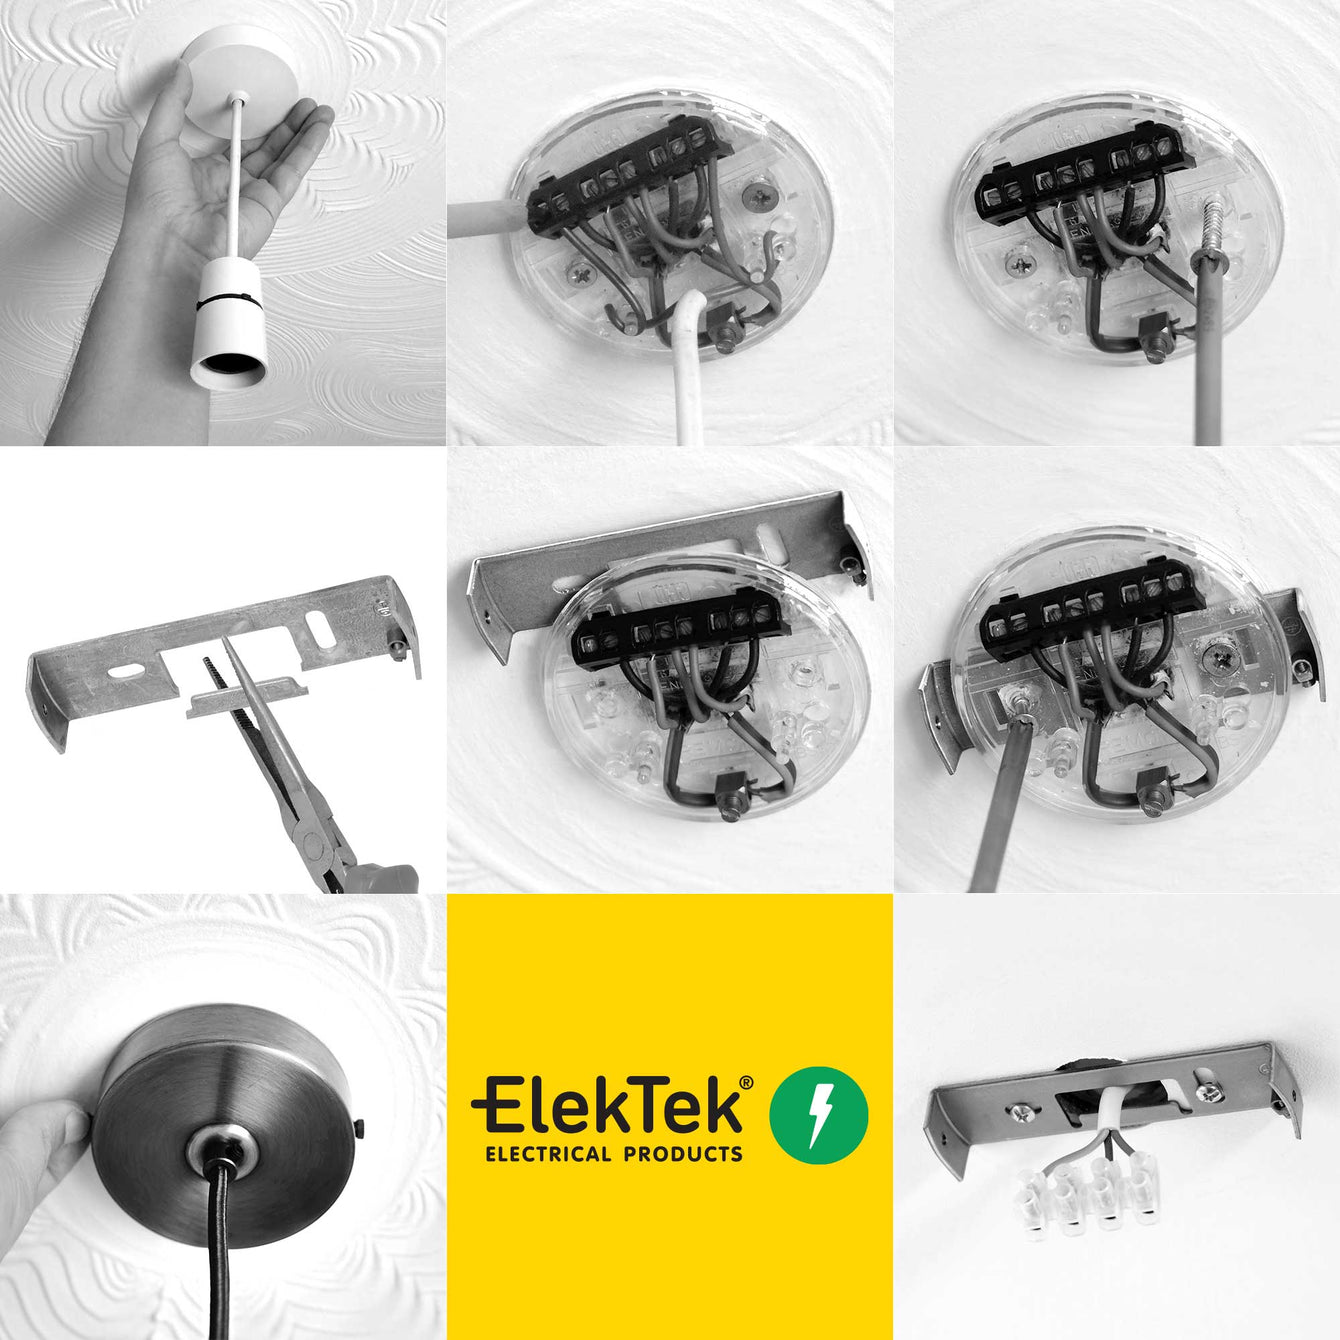 ElekTek 100mm Diameter Convex Ceiling Rose with Strap Bracket and Cord Grip Metallic Finishes Powder Coated Colours Fusion Bronze